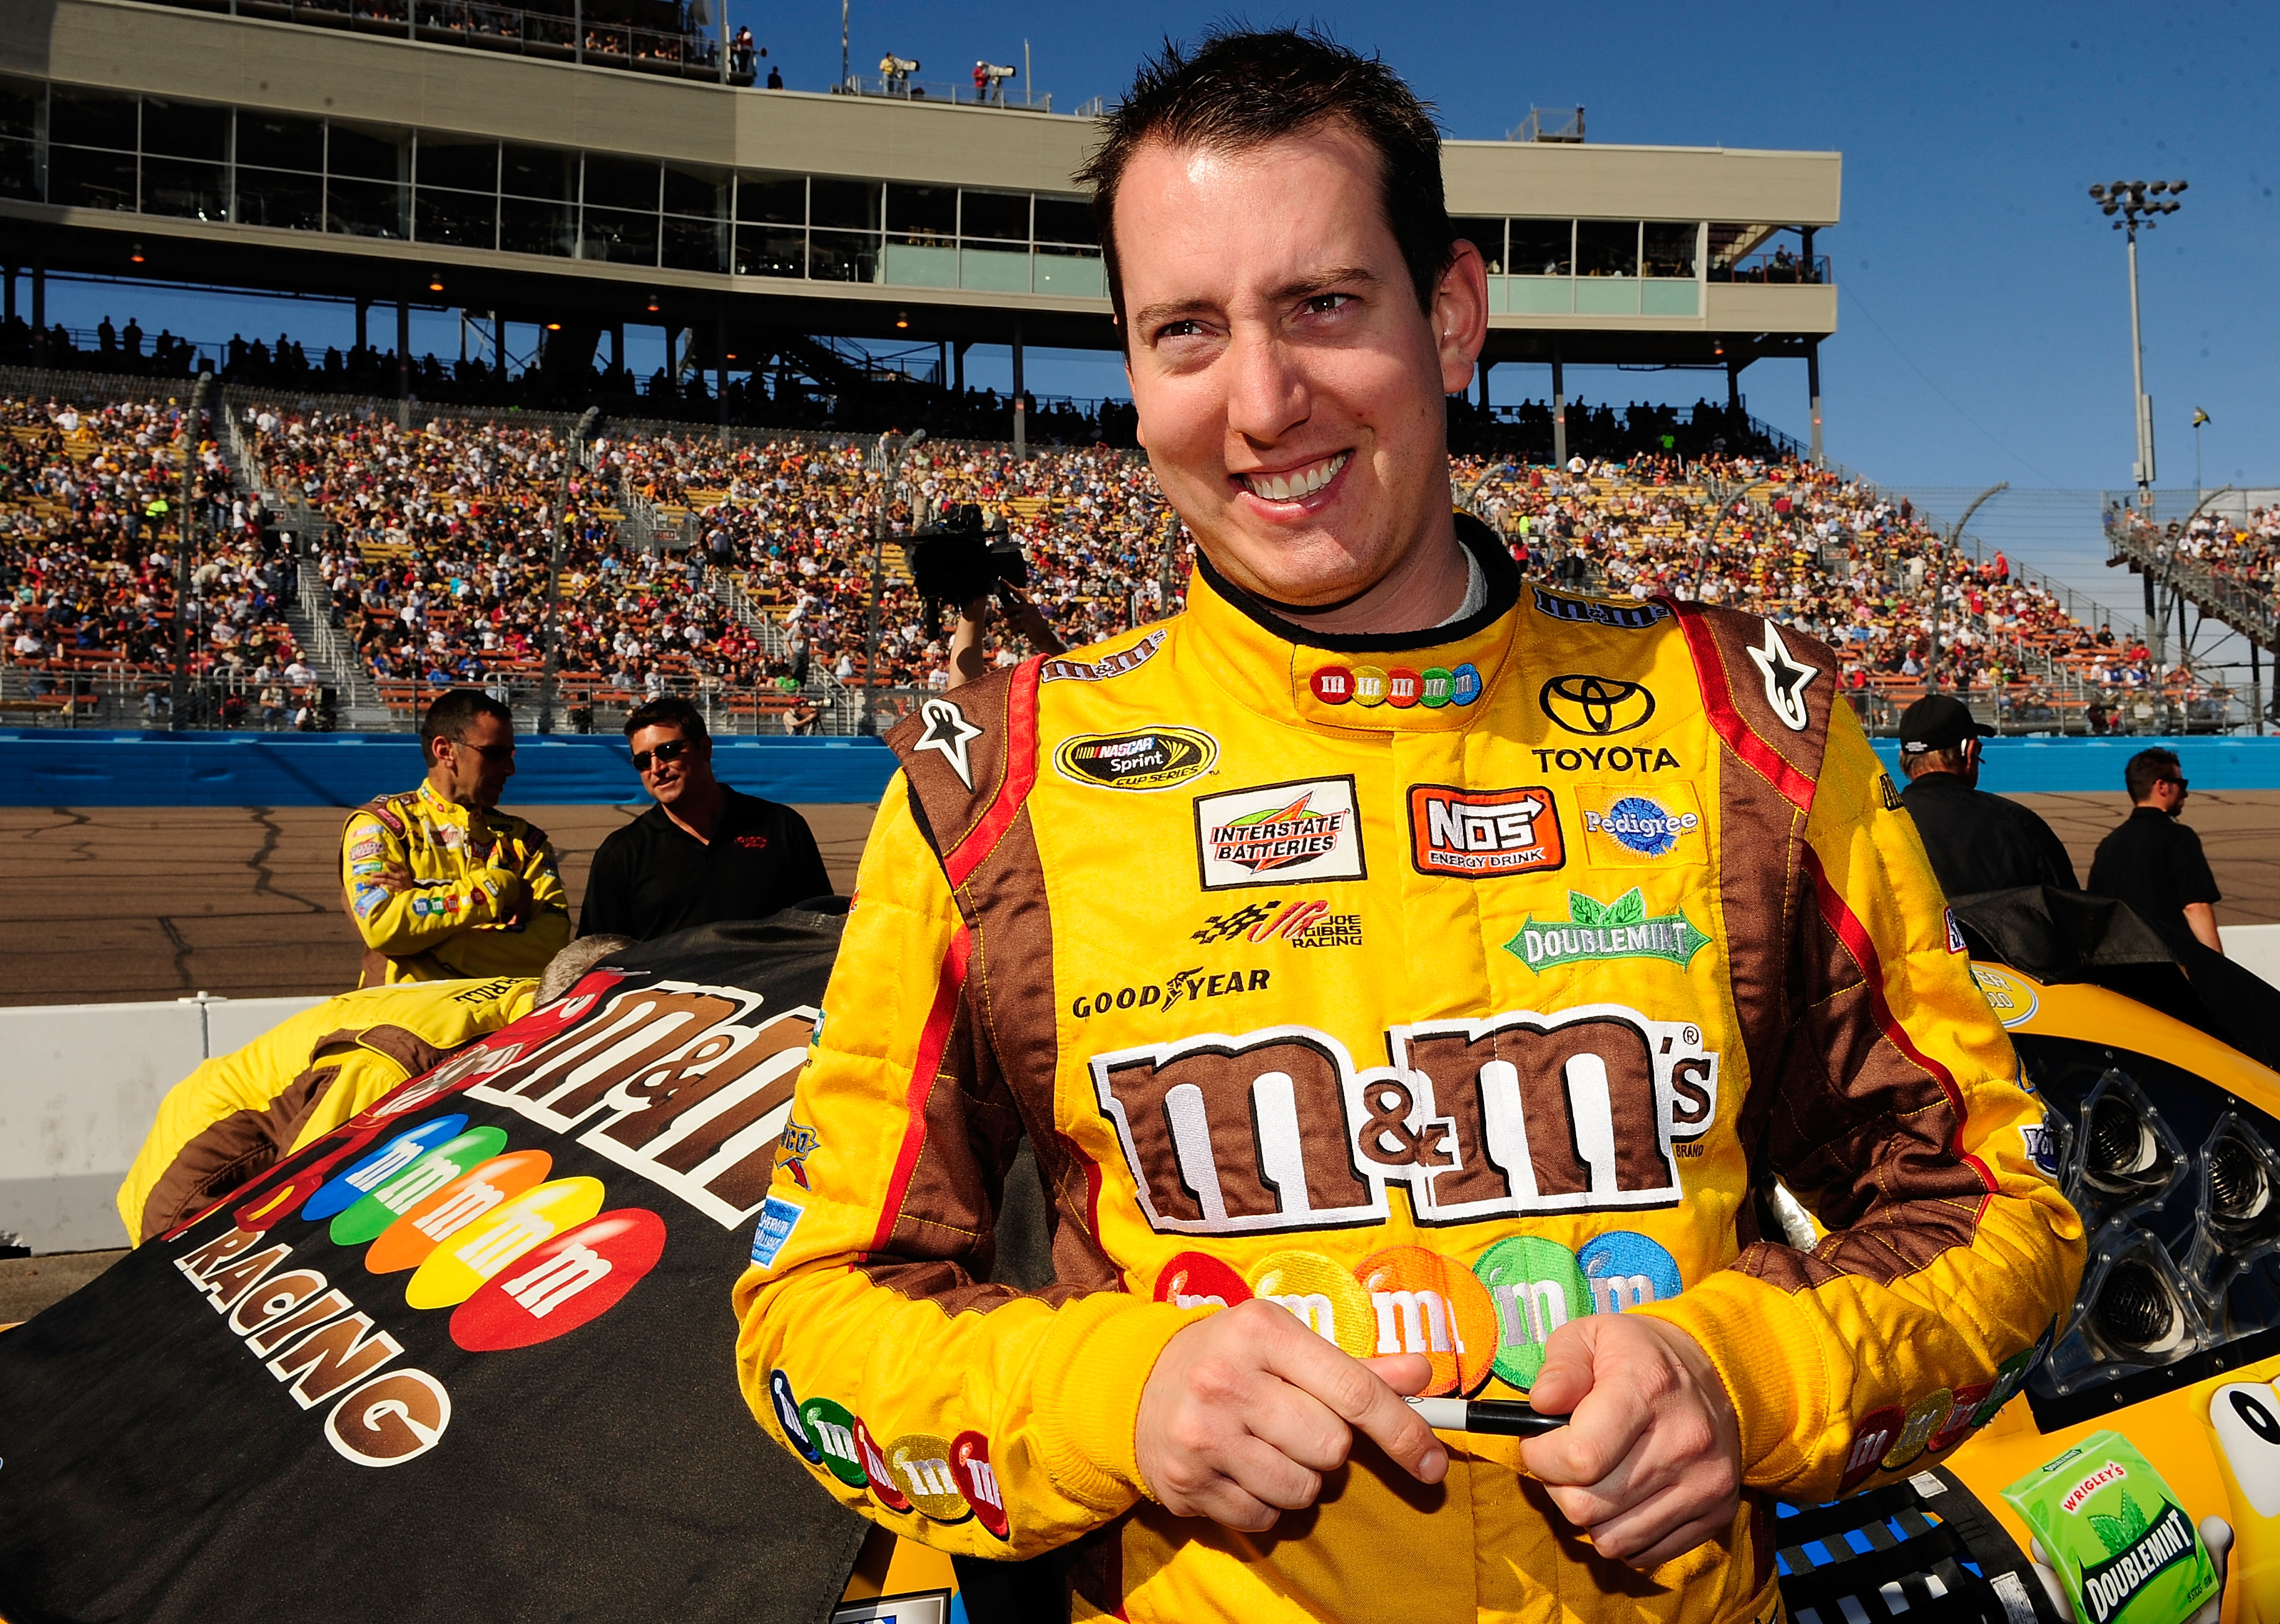 AVONDALE, AZ - NOVEMBER 14:  Kyle Busch, driver of the #18 M&M'sToyota, stands by his car prior to the NASCAR Sprint Cup Series Kobalt Tools 500 at Phoenix International Raceway on November 14, 2010 in Avondale, Arizona.  (Photo by Rusty Jarrett/Getty Ima